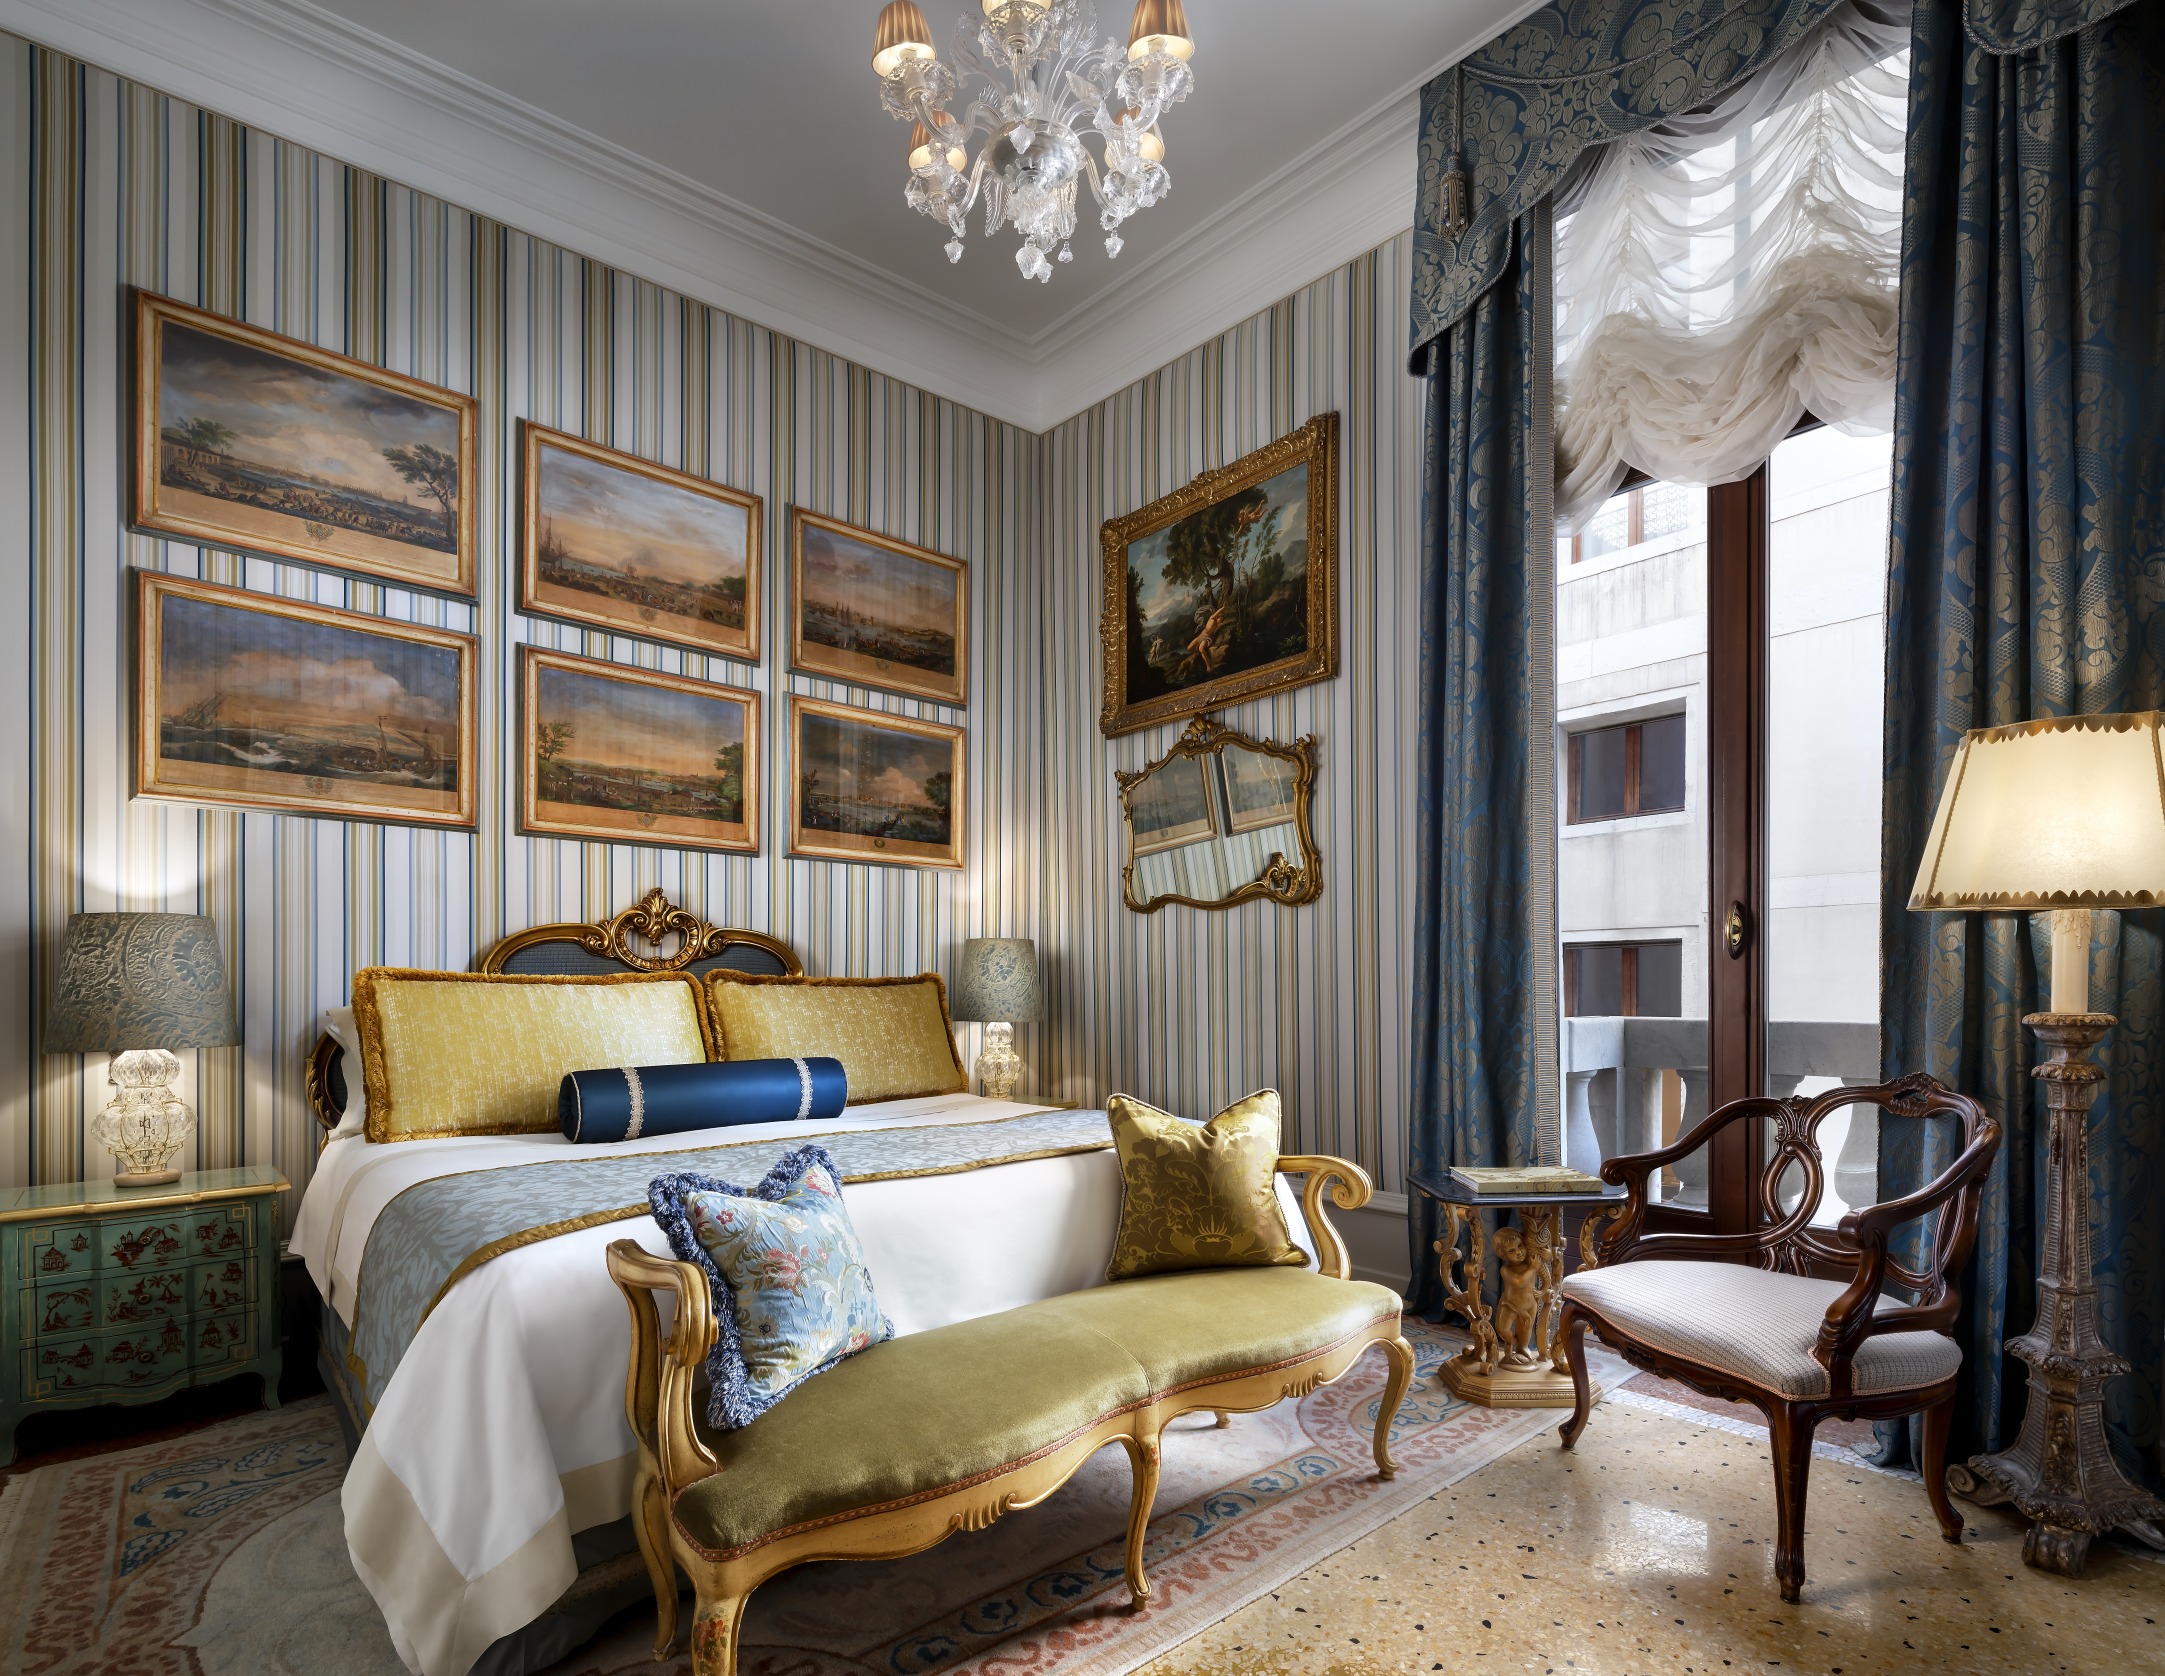 https://theauctioncollective.com/media/4561/the-gritti-palace-3.jpg